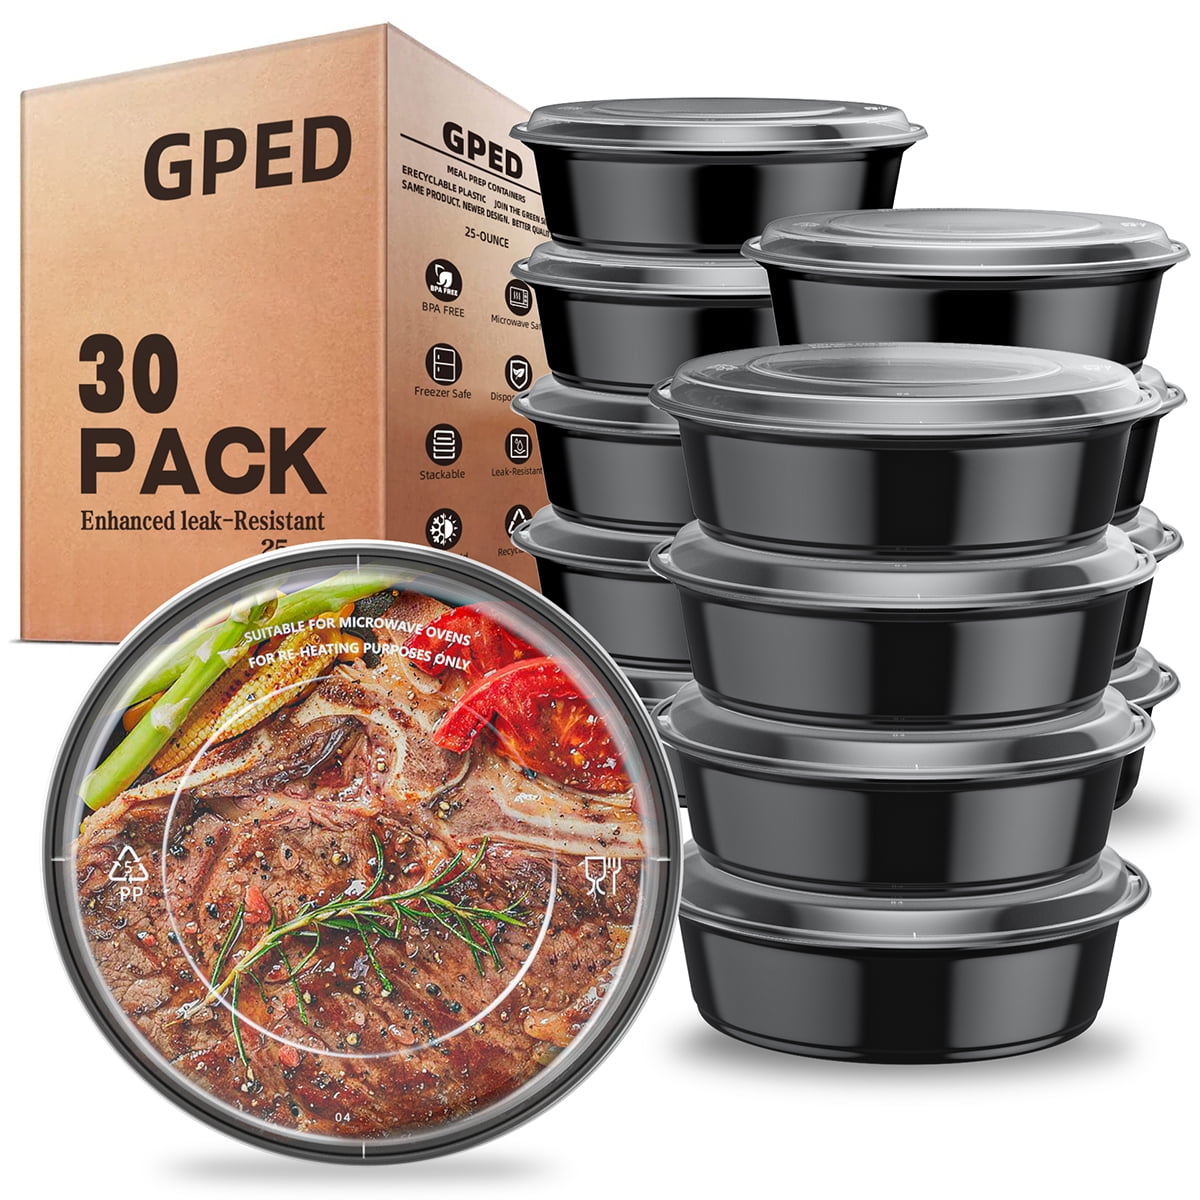 Meal Prep Container,30 Pack Food Prep Containers,28 oz Meal Prep Bowls with  Lids,Reusable Food Conta…See more Meal Prep Container,30 Pack Food Prep